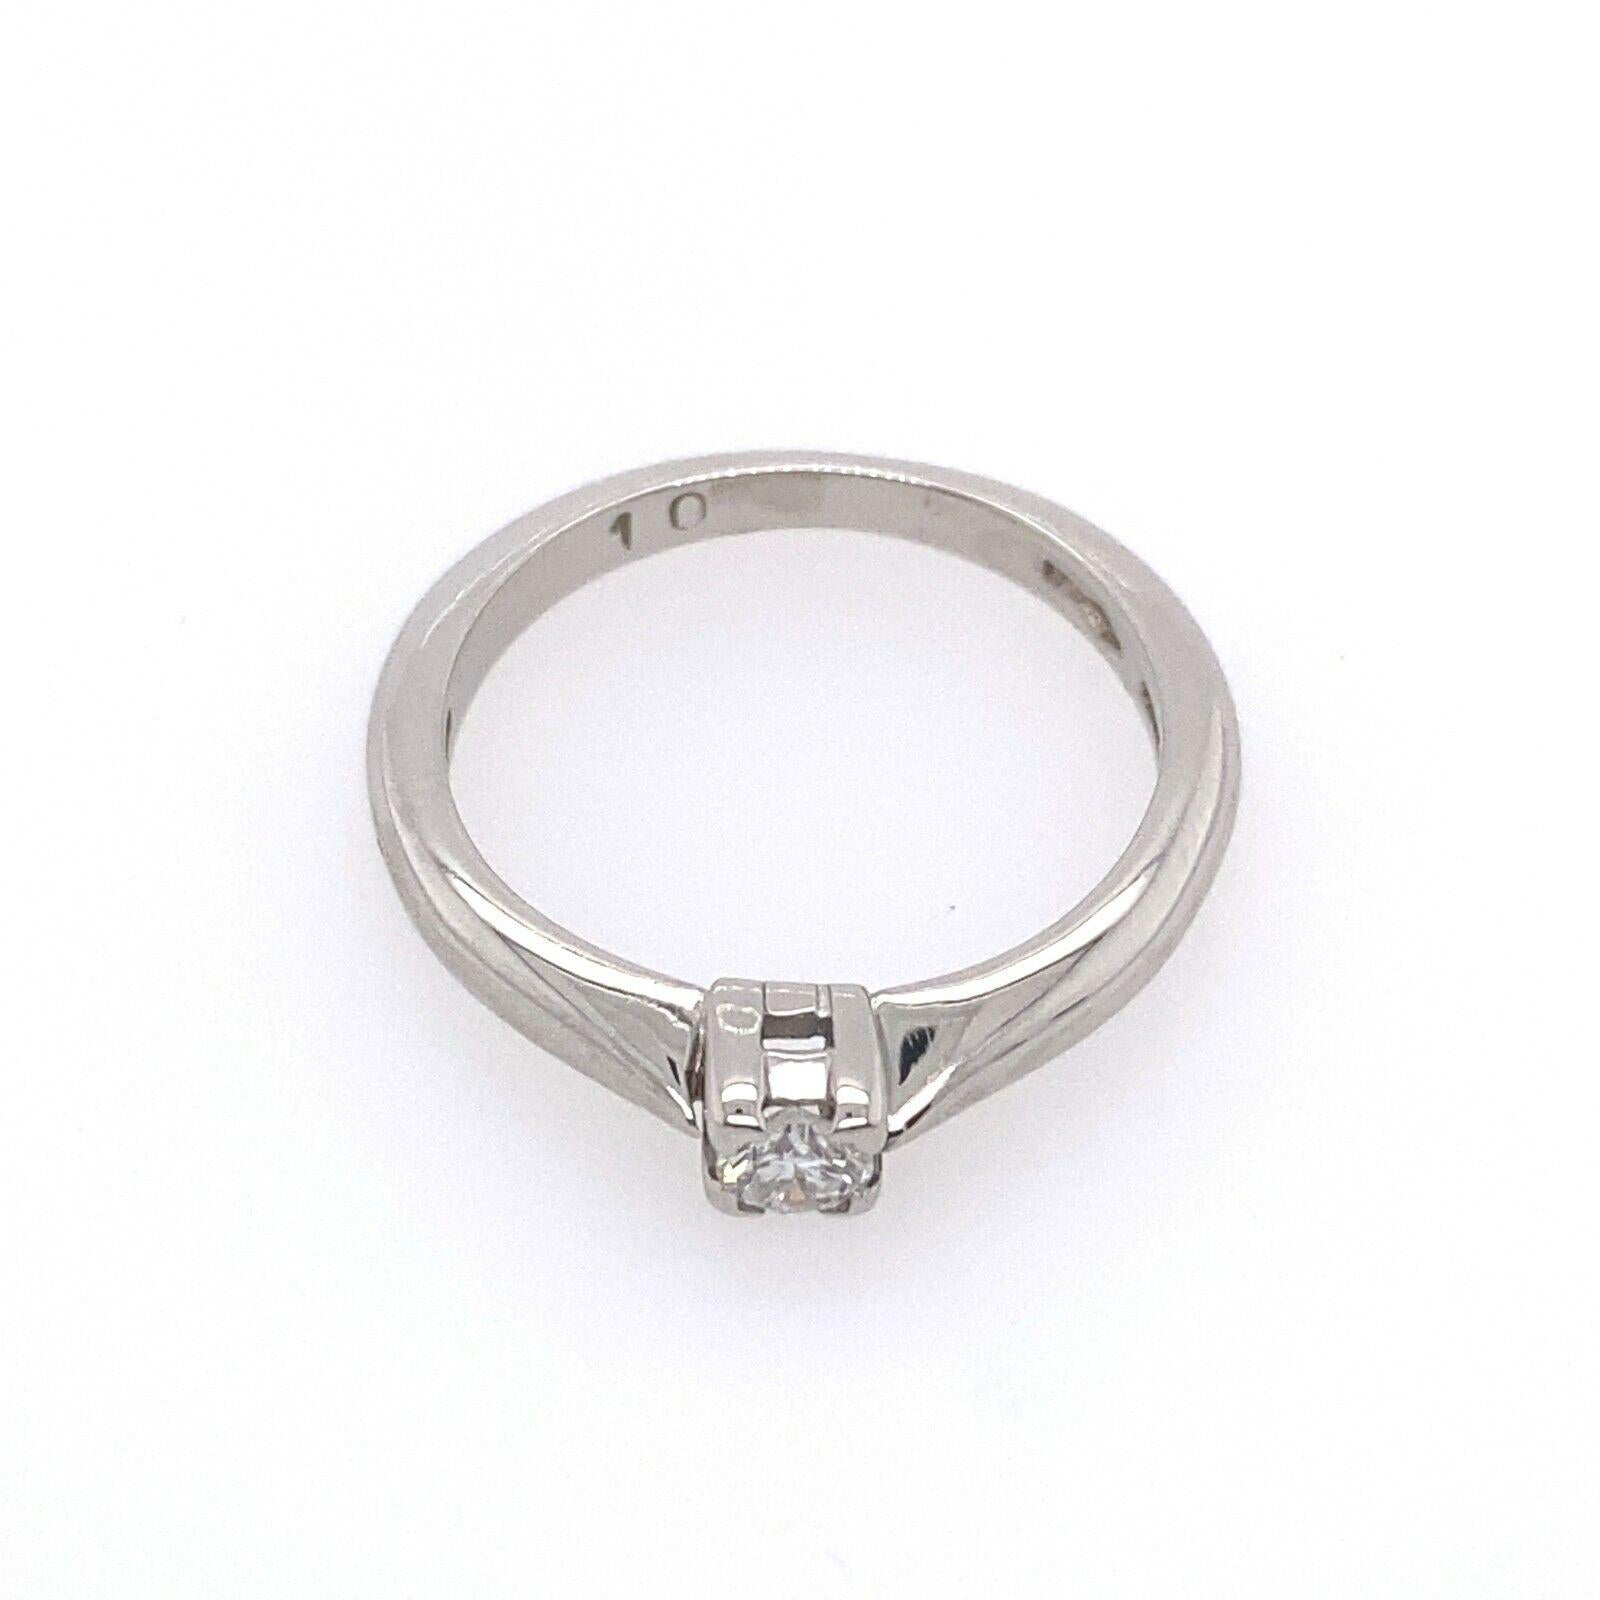 Platinum Solitaire Diamond Ring Set With a 0.10ct Round Brilliant Diamond

Additional Information:
Total Diamond Weight: 0.10ct
Diamond Colour: G/H
Diamond Clarity: SI
Total Weight: 3.2g
Ring Size: H
Width of Band: 2.2mm
Width of Head: 3.2mm
Length